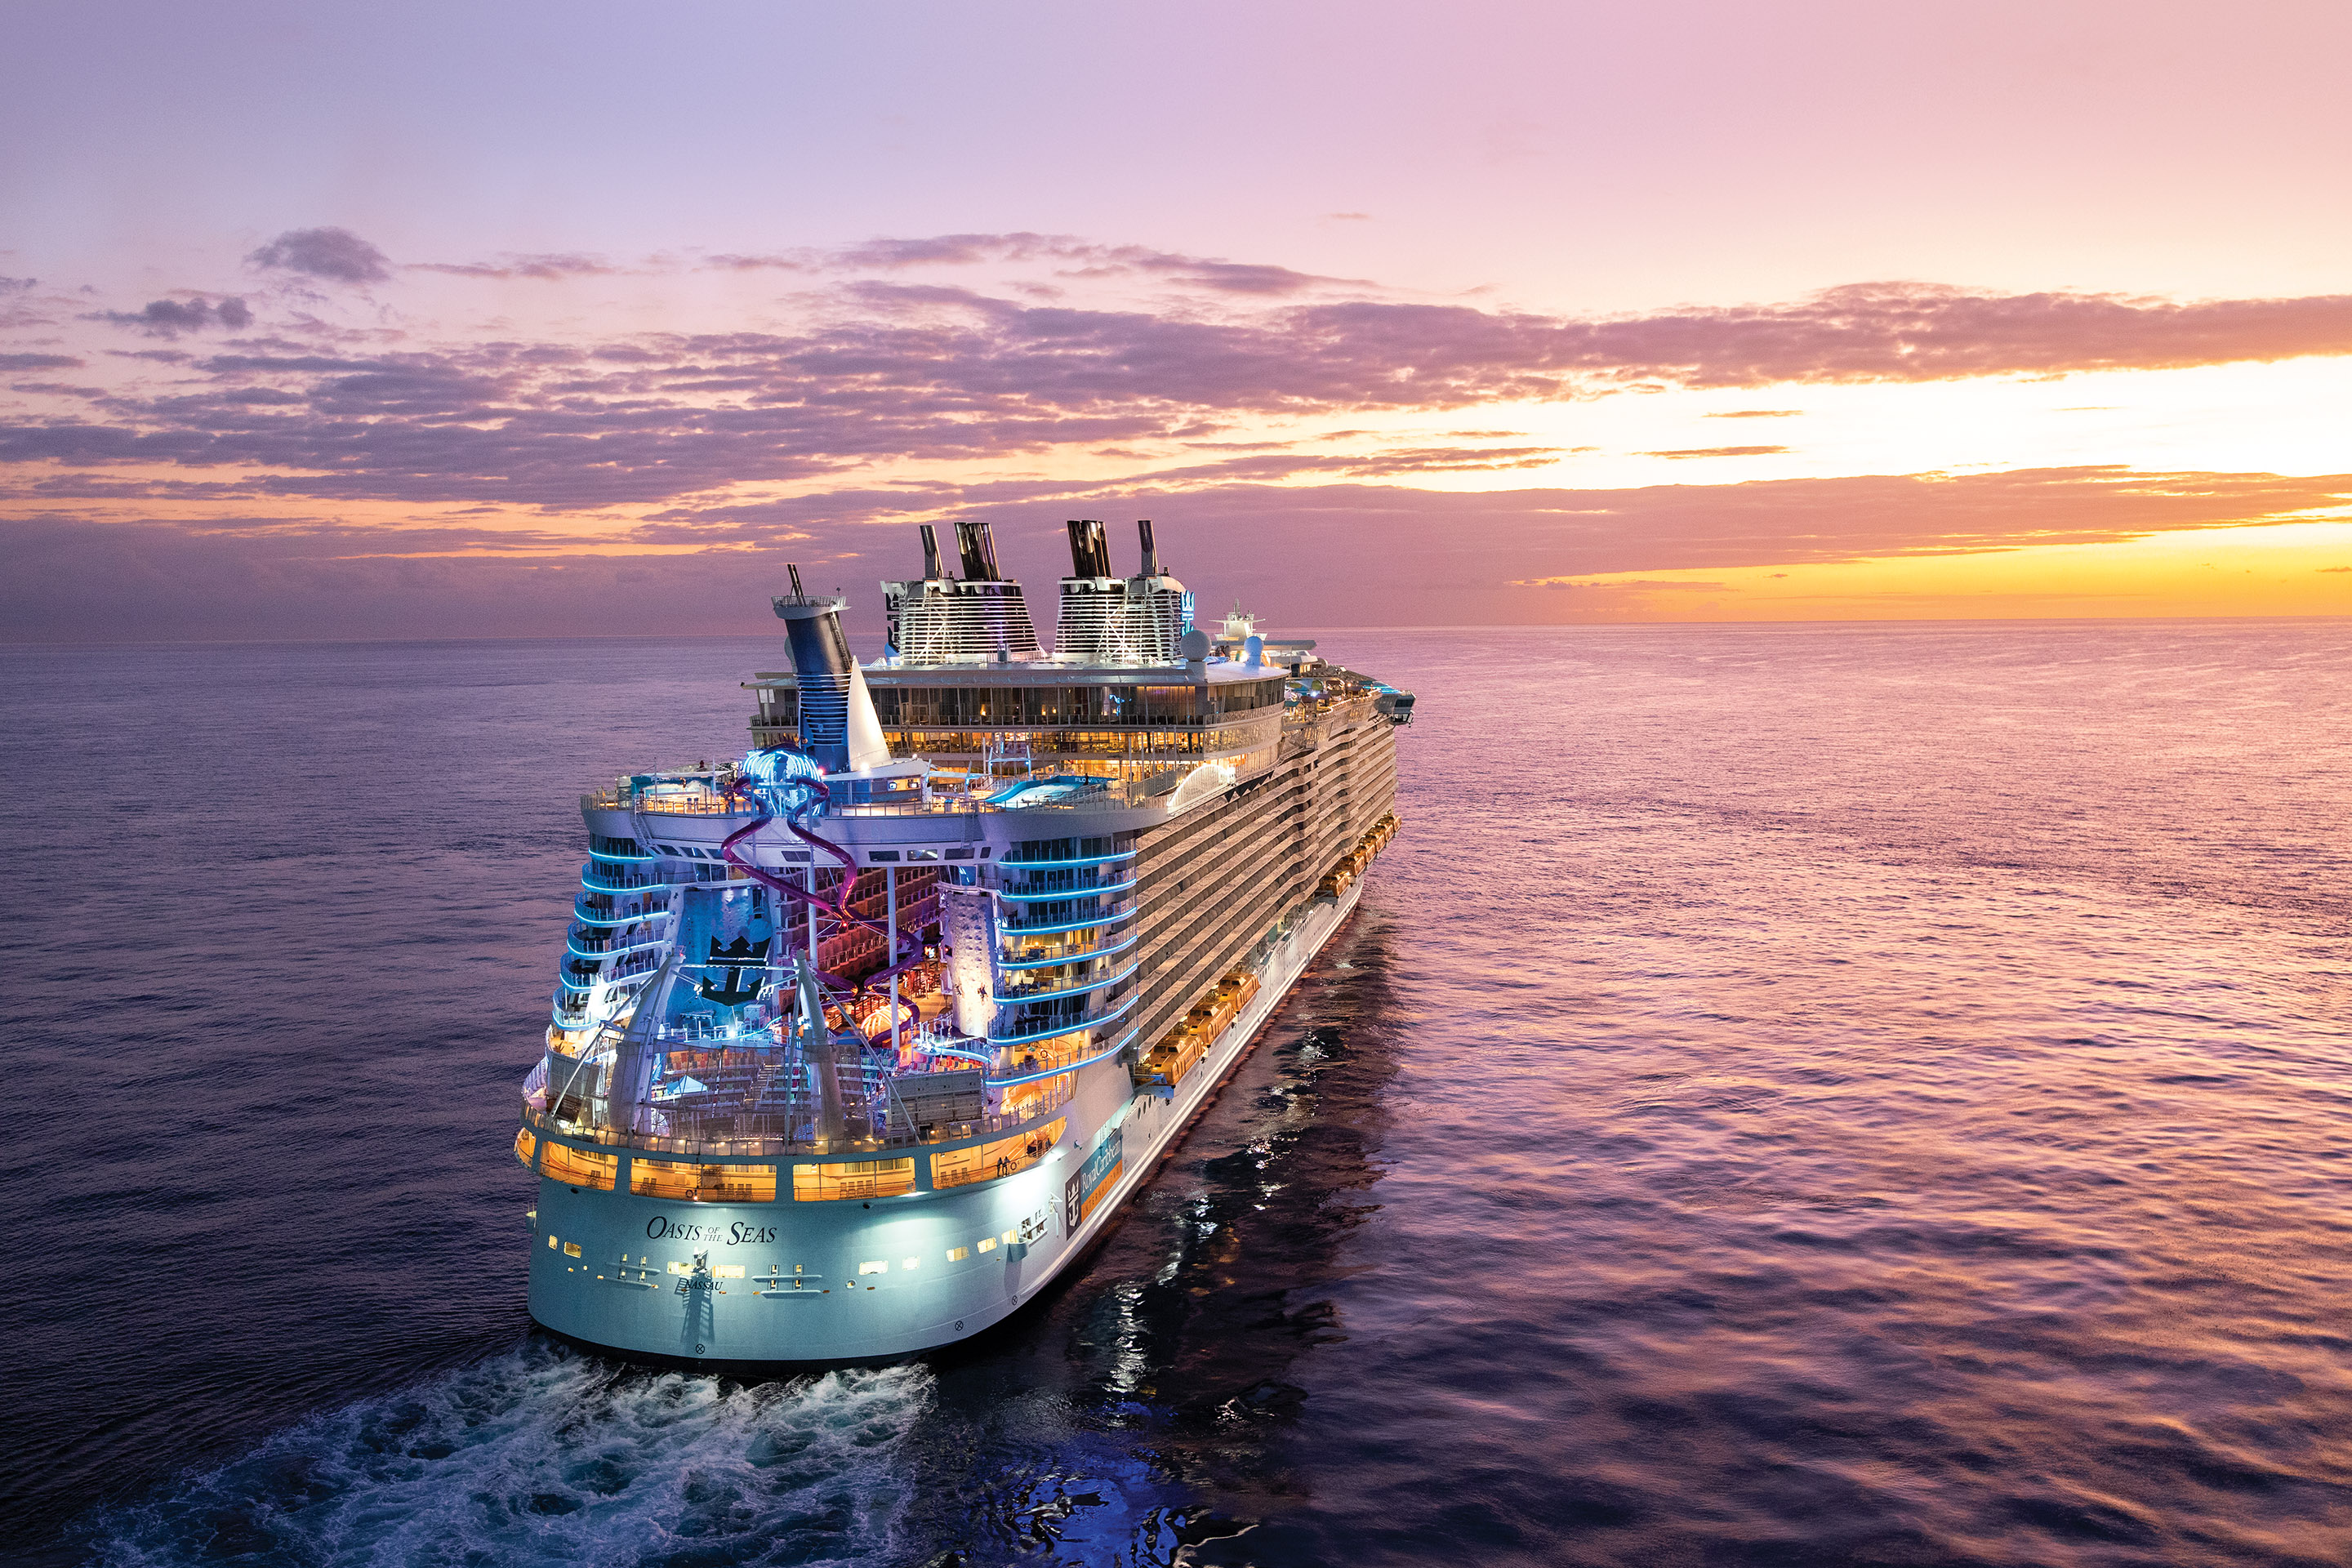 Oasis of the Seas sailing into the sunset